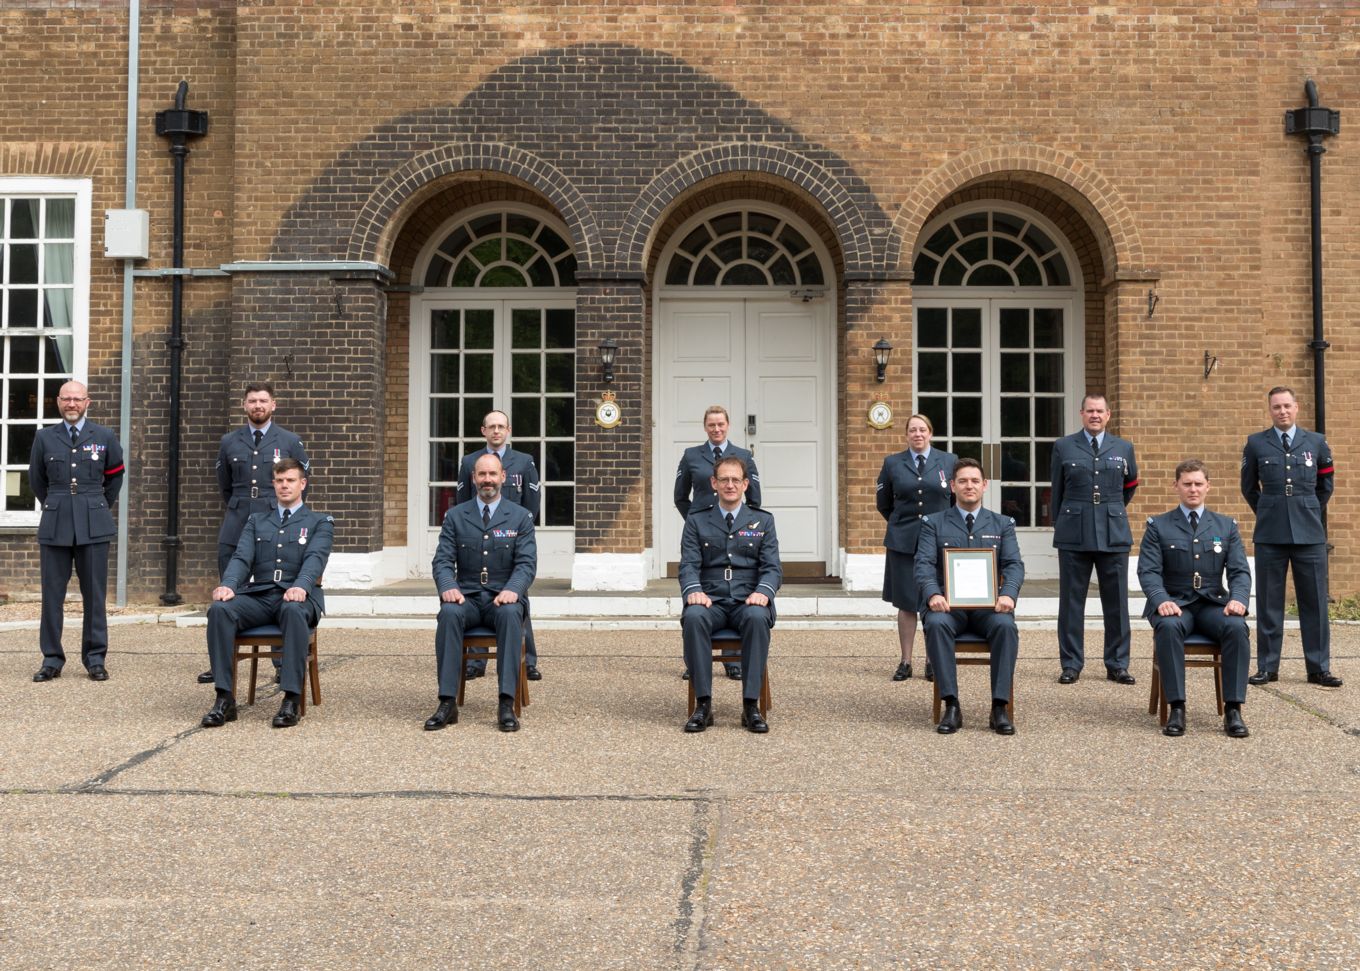 AVM Gillespie delivers Honours and Awards at the Annual Formal Inspection 